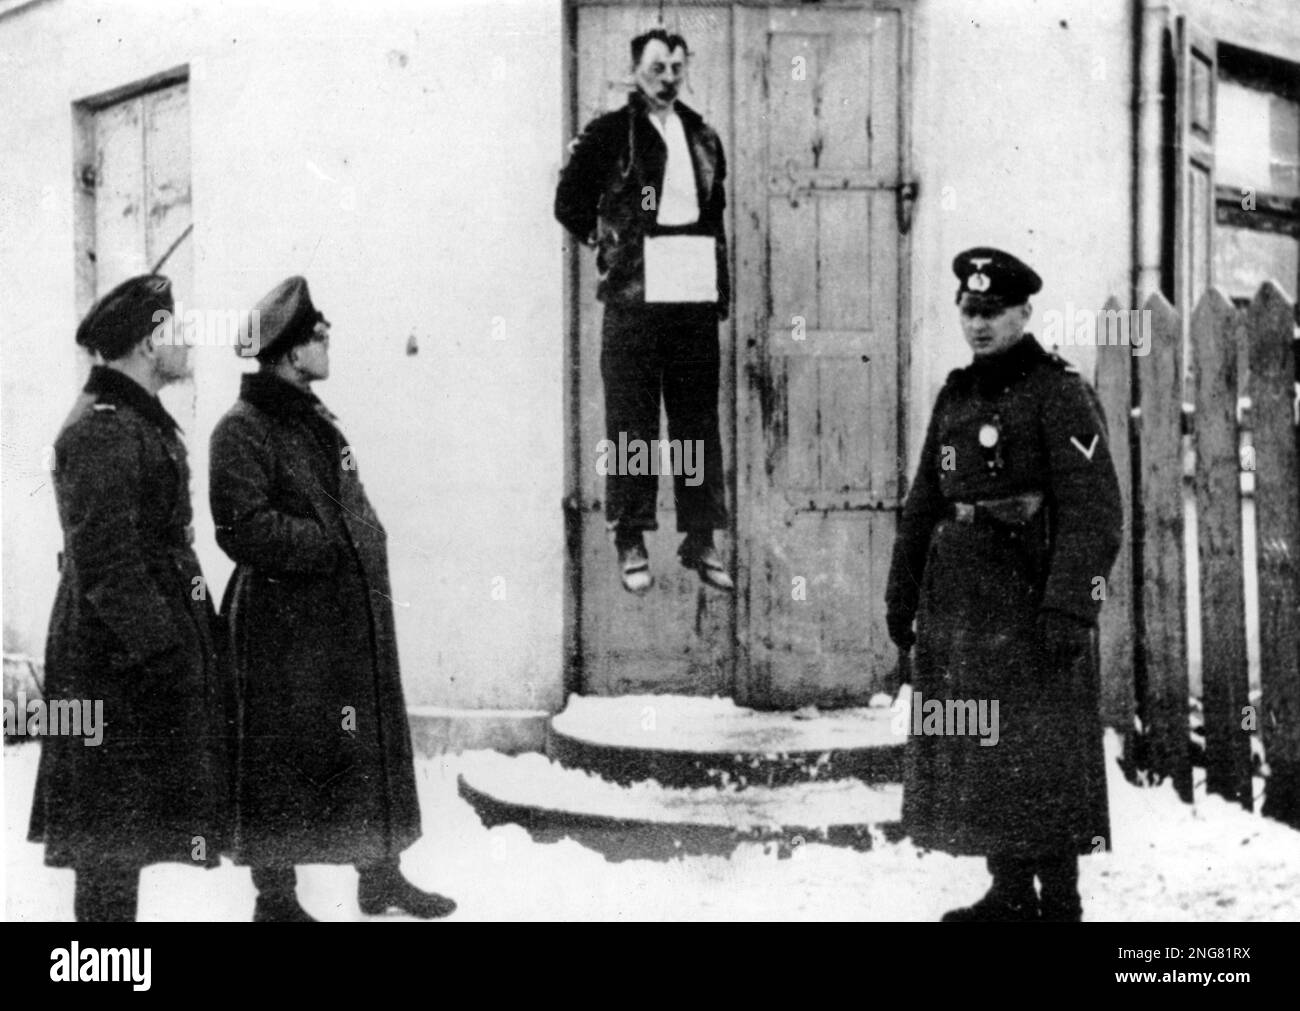 German officers looking at the hanged body of a civilian man in Warsaw during WW2. Stock Photo